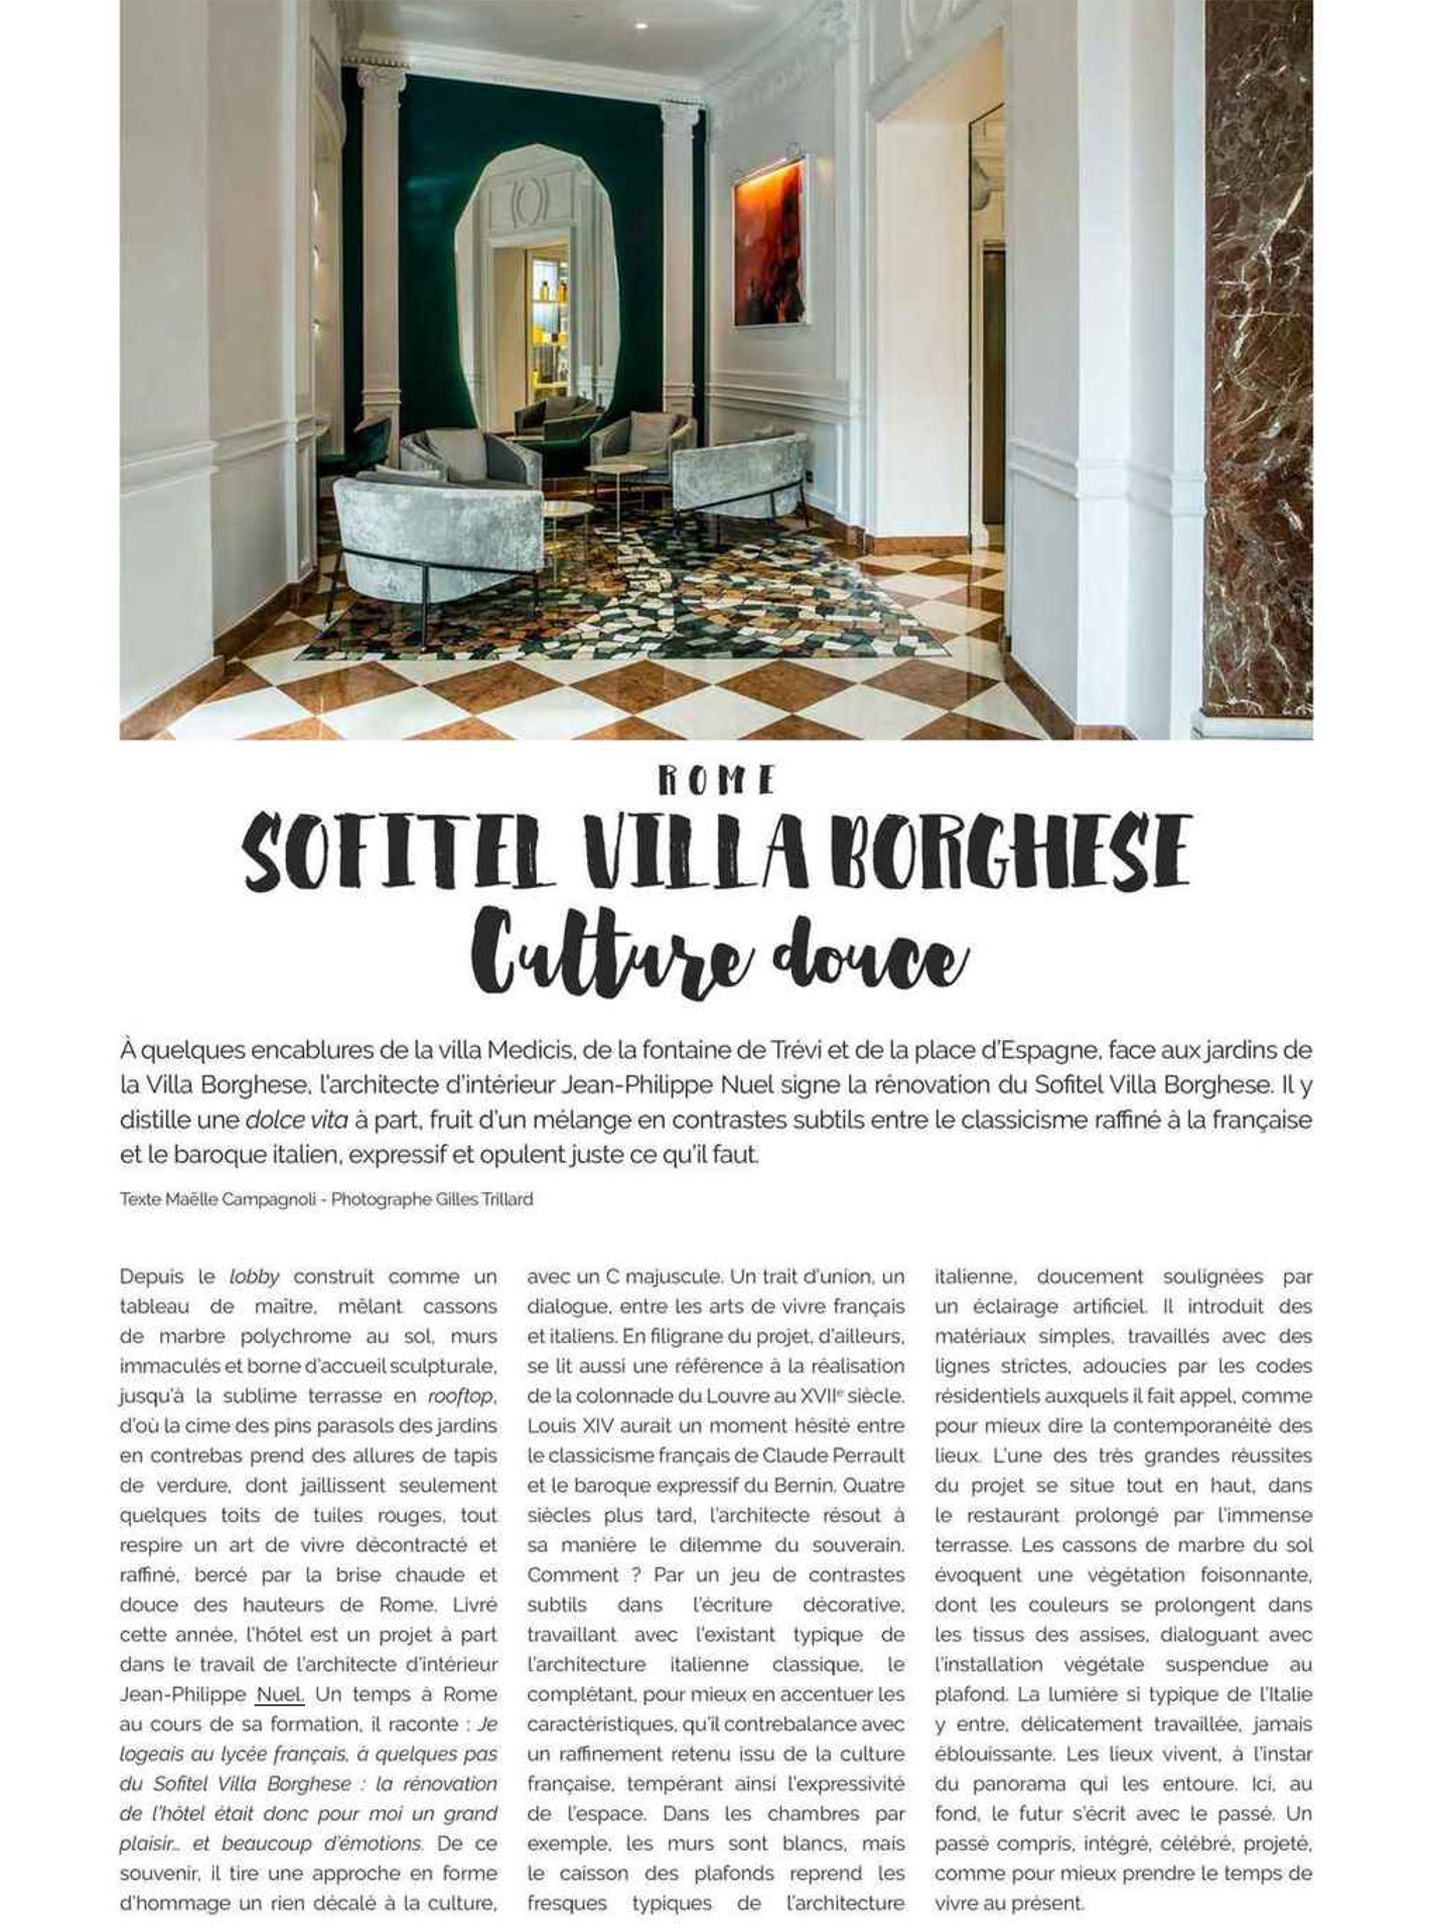 Article on the Sofitel Rome Villa Borghese realized by the studio jean-Philippe Nuel in the magazine domodéco, new lifestyle hotel, luxury interior design, luxury hotel in Italy